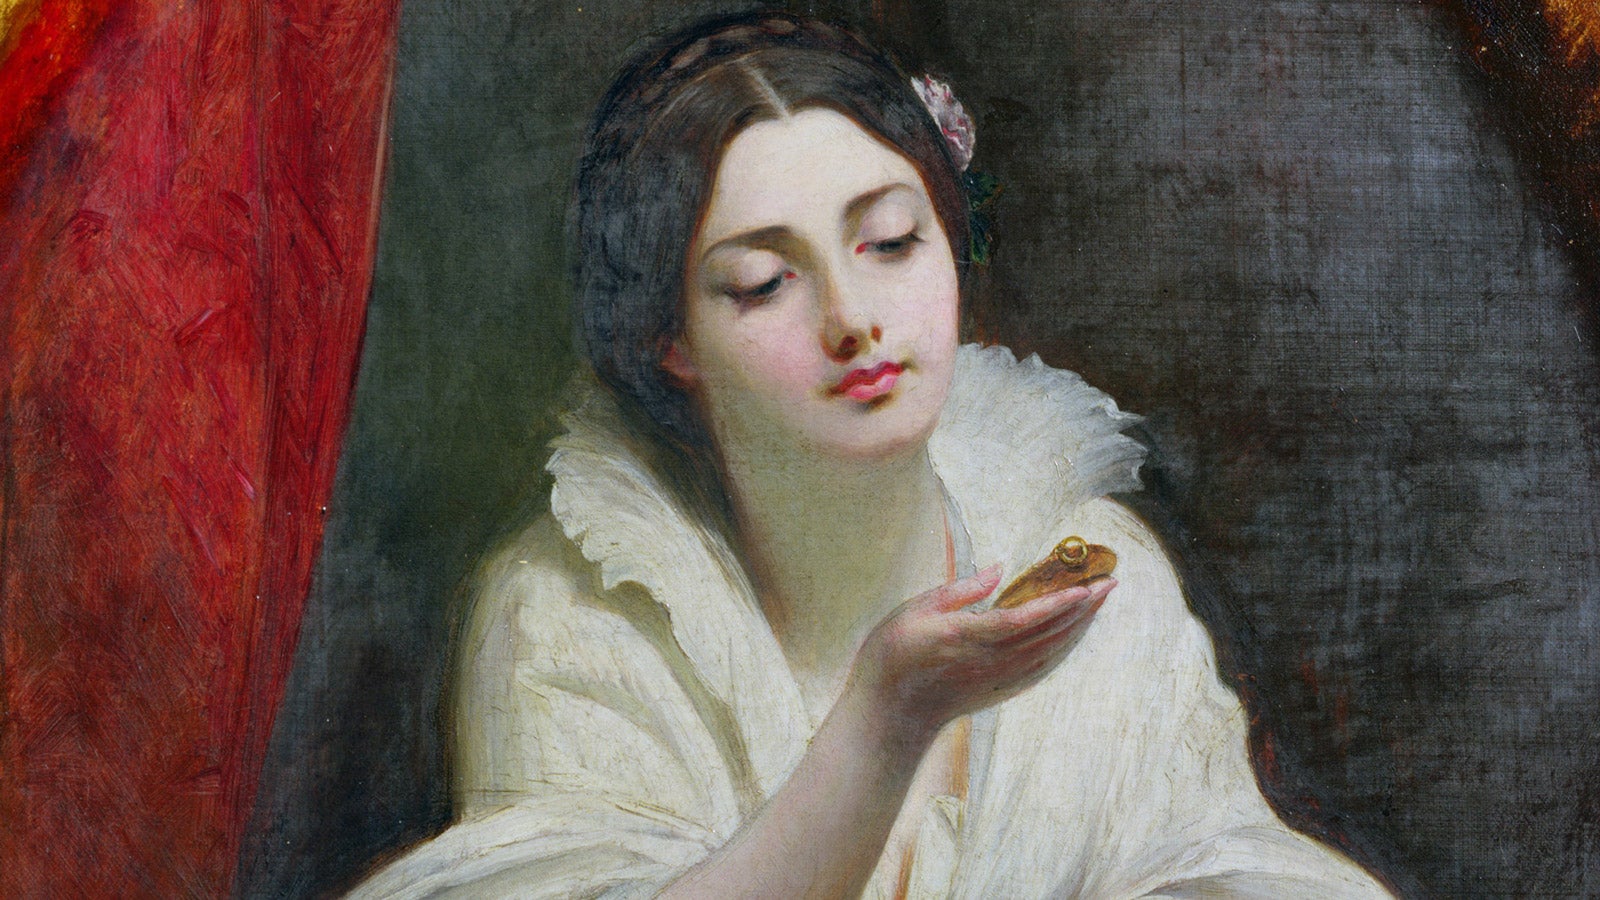 Renaissance painting of a young girl with brown hair gazing at a pocket watch.